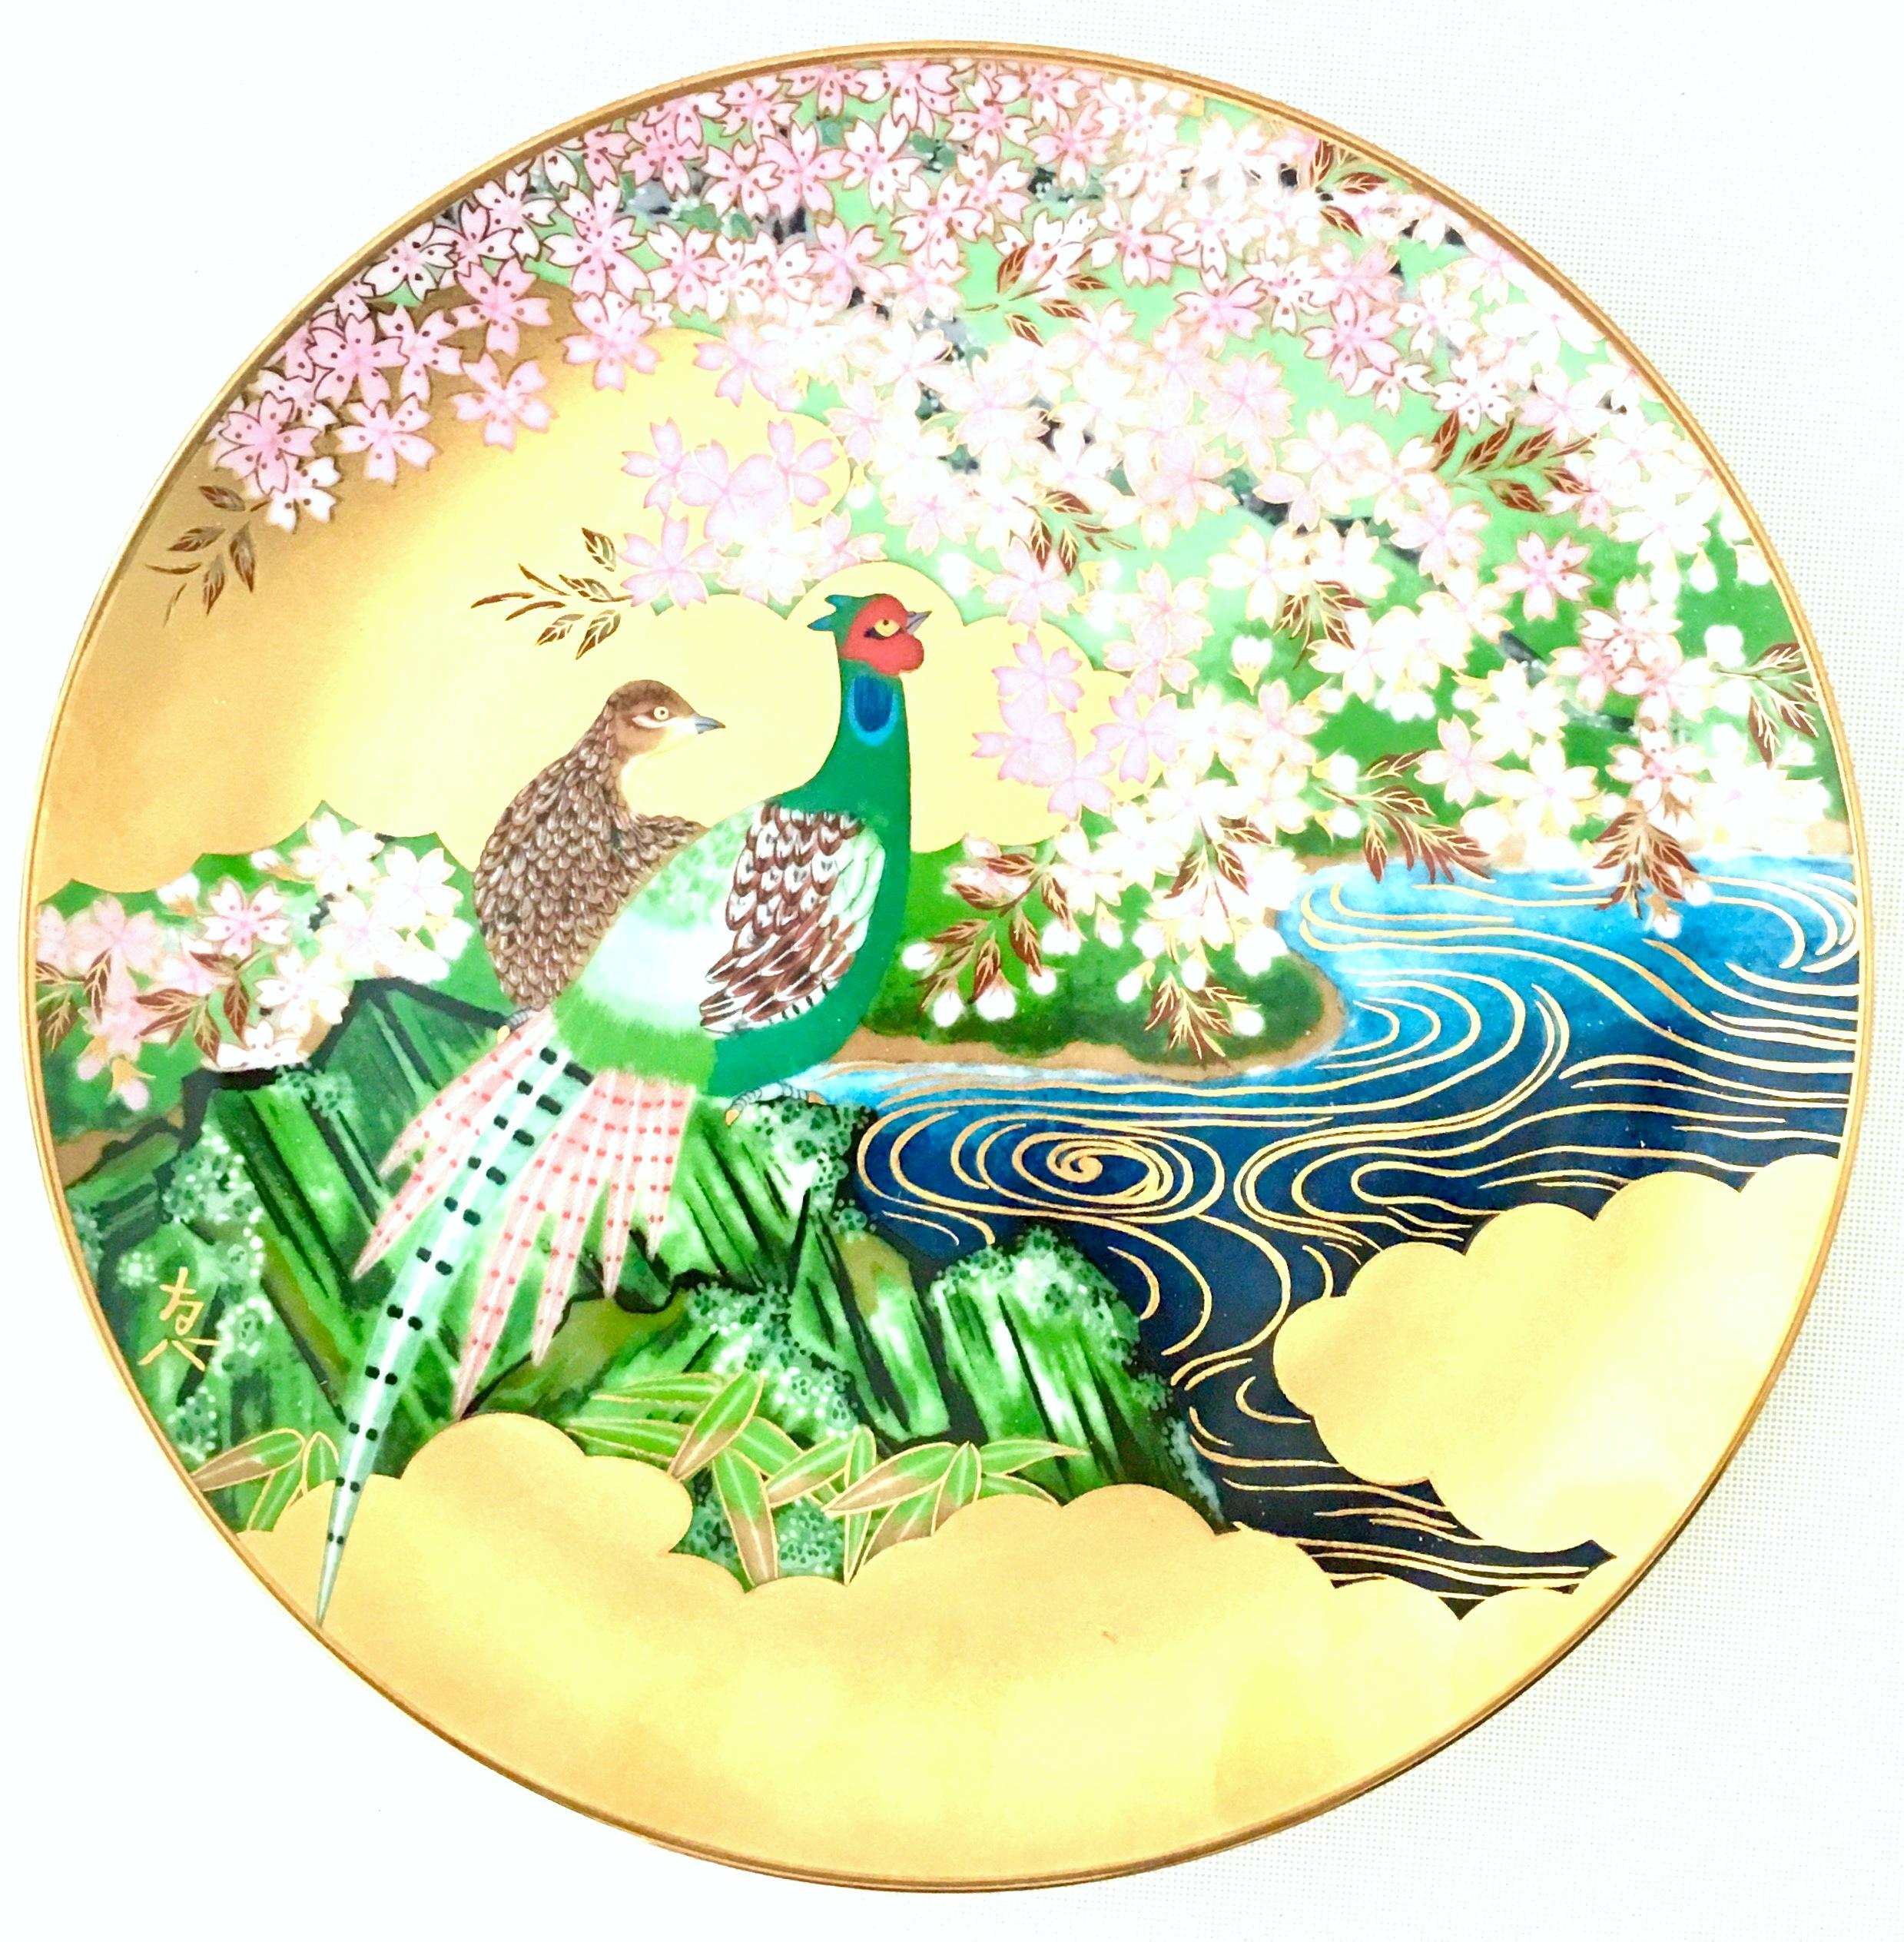 Enamel 1986 Japanese Limited Edition Hand-Painted Porcelain Plates Set of 4 For Sale